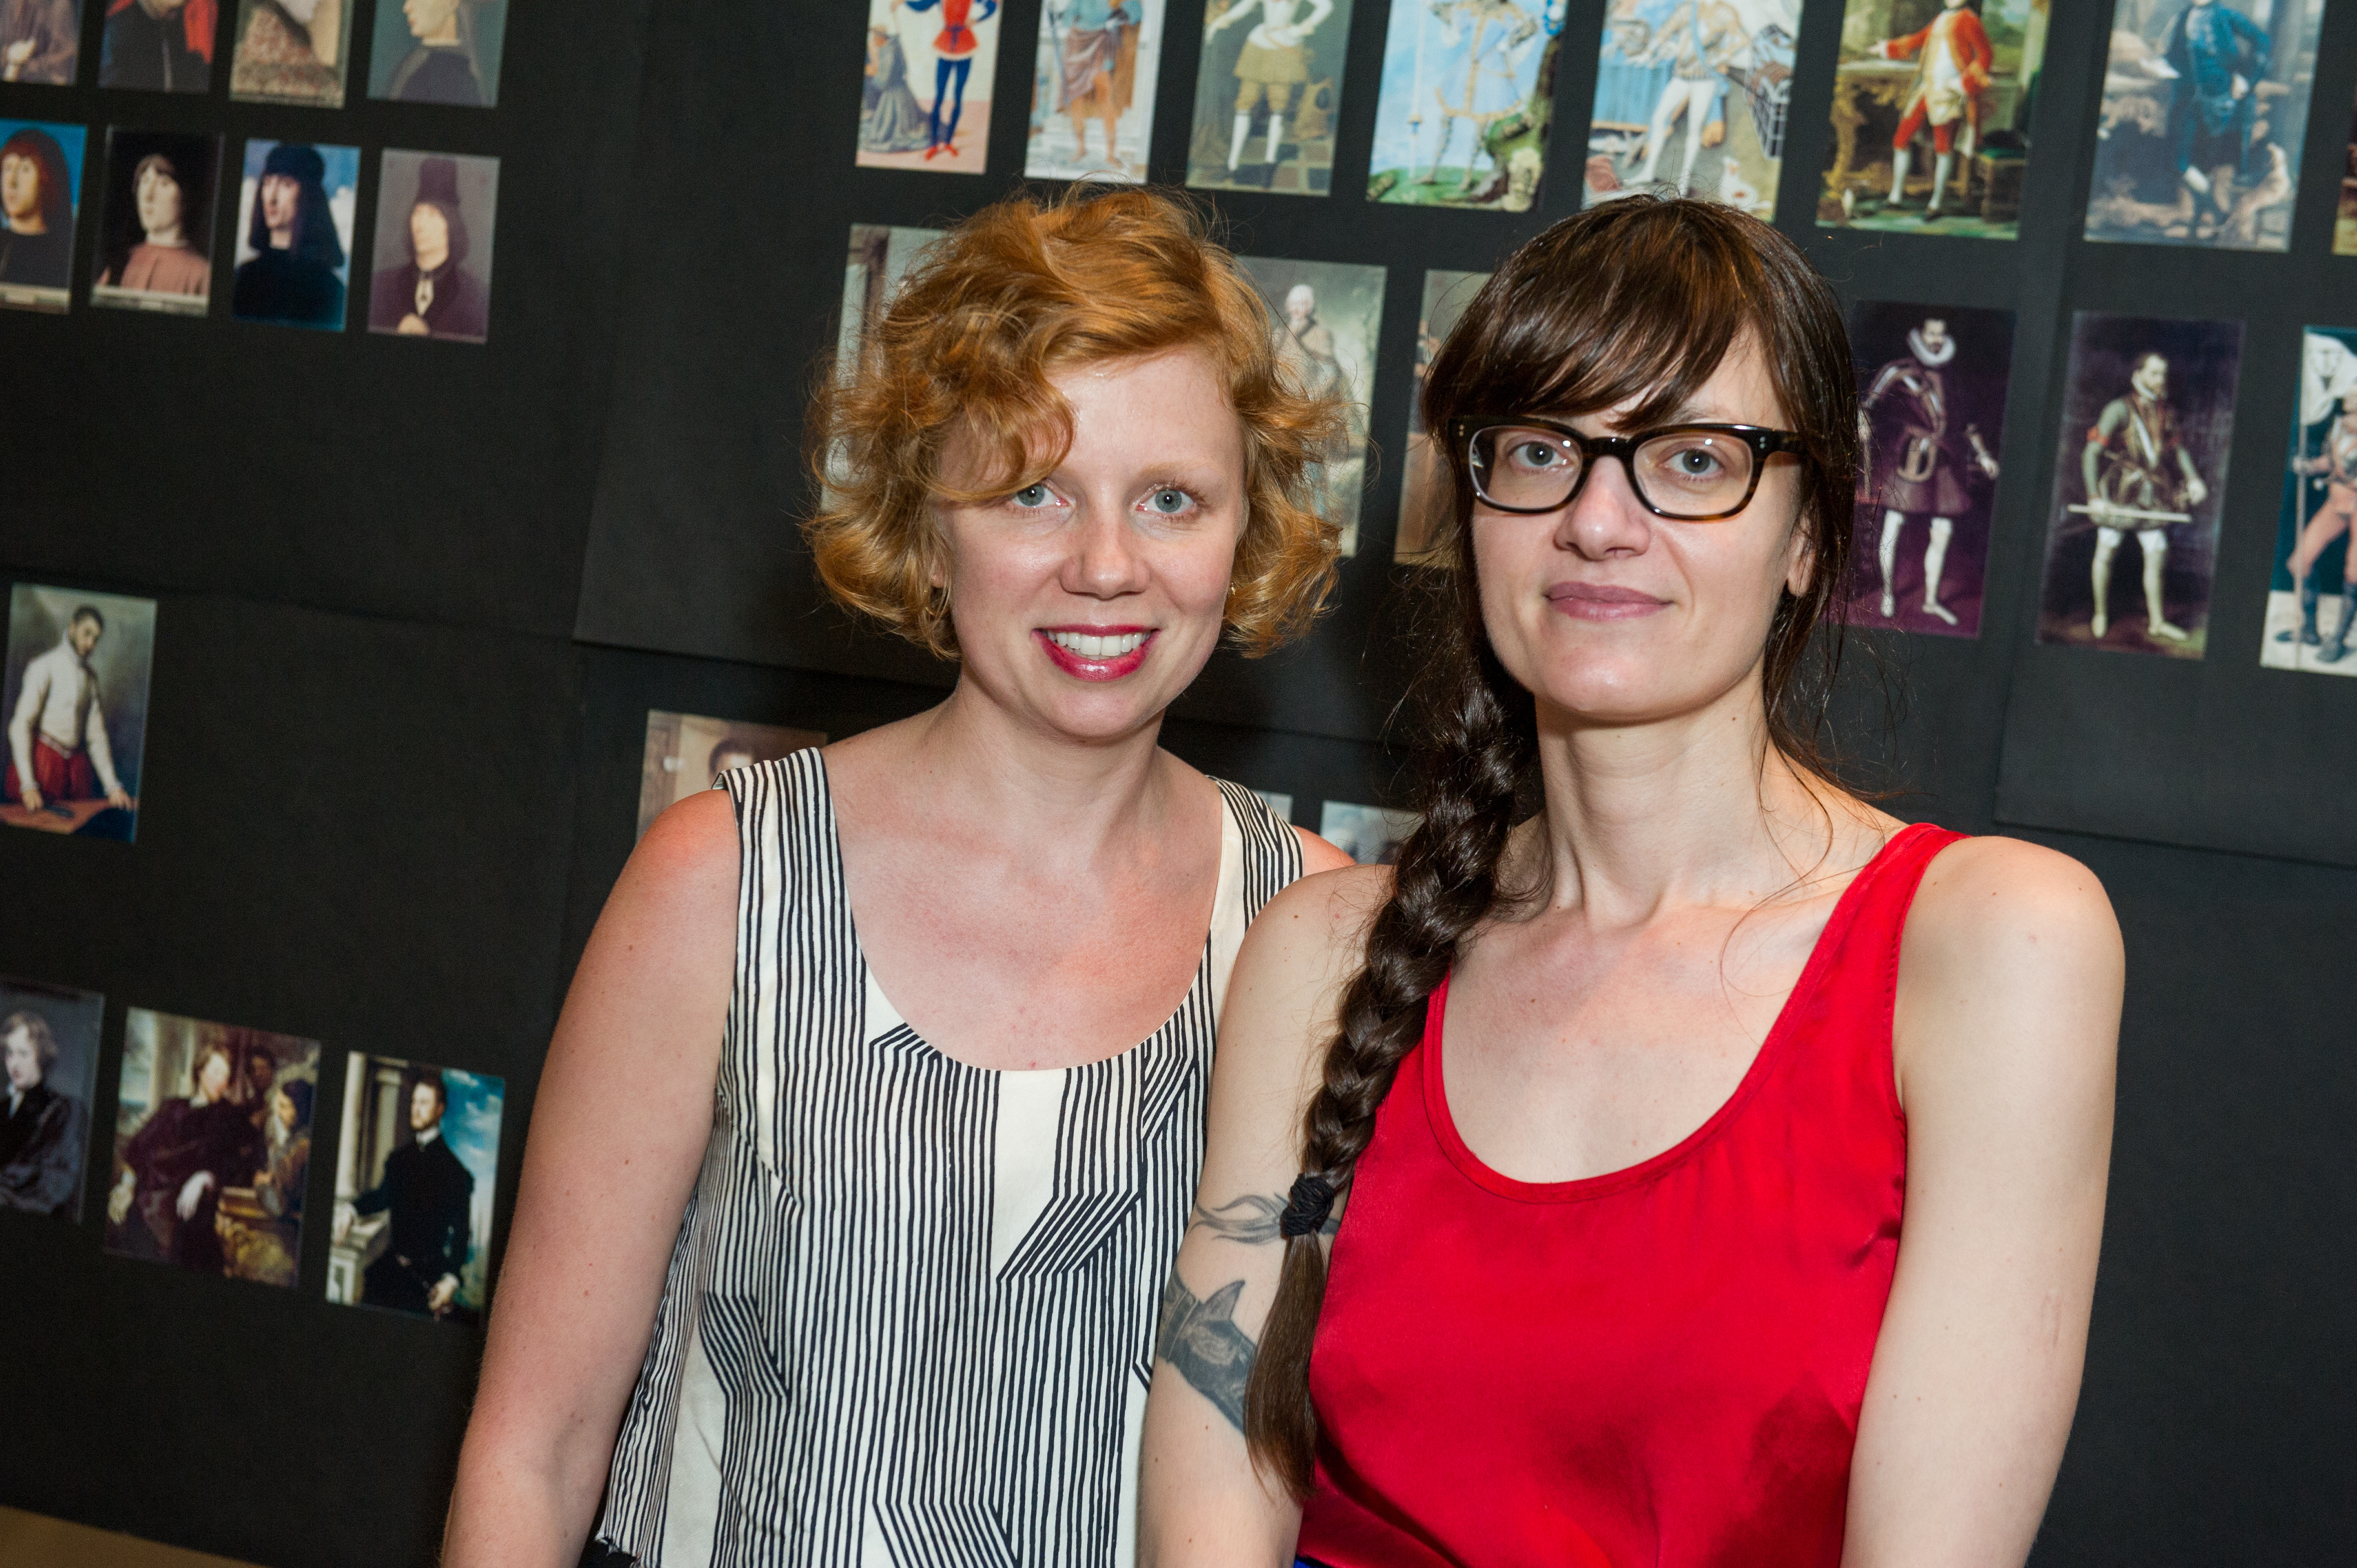 Natalie Bell and Andra Ursuta at the New Museum for the opening of "The Keeper." Courtesy of Madison McGaw/BFA.